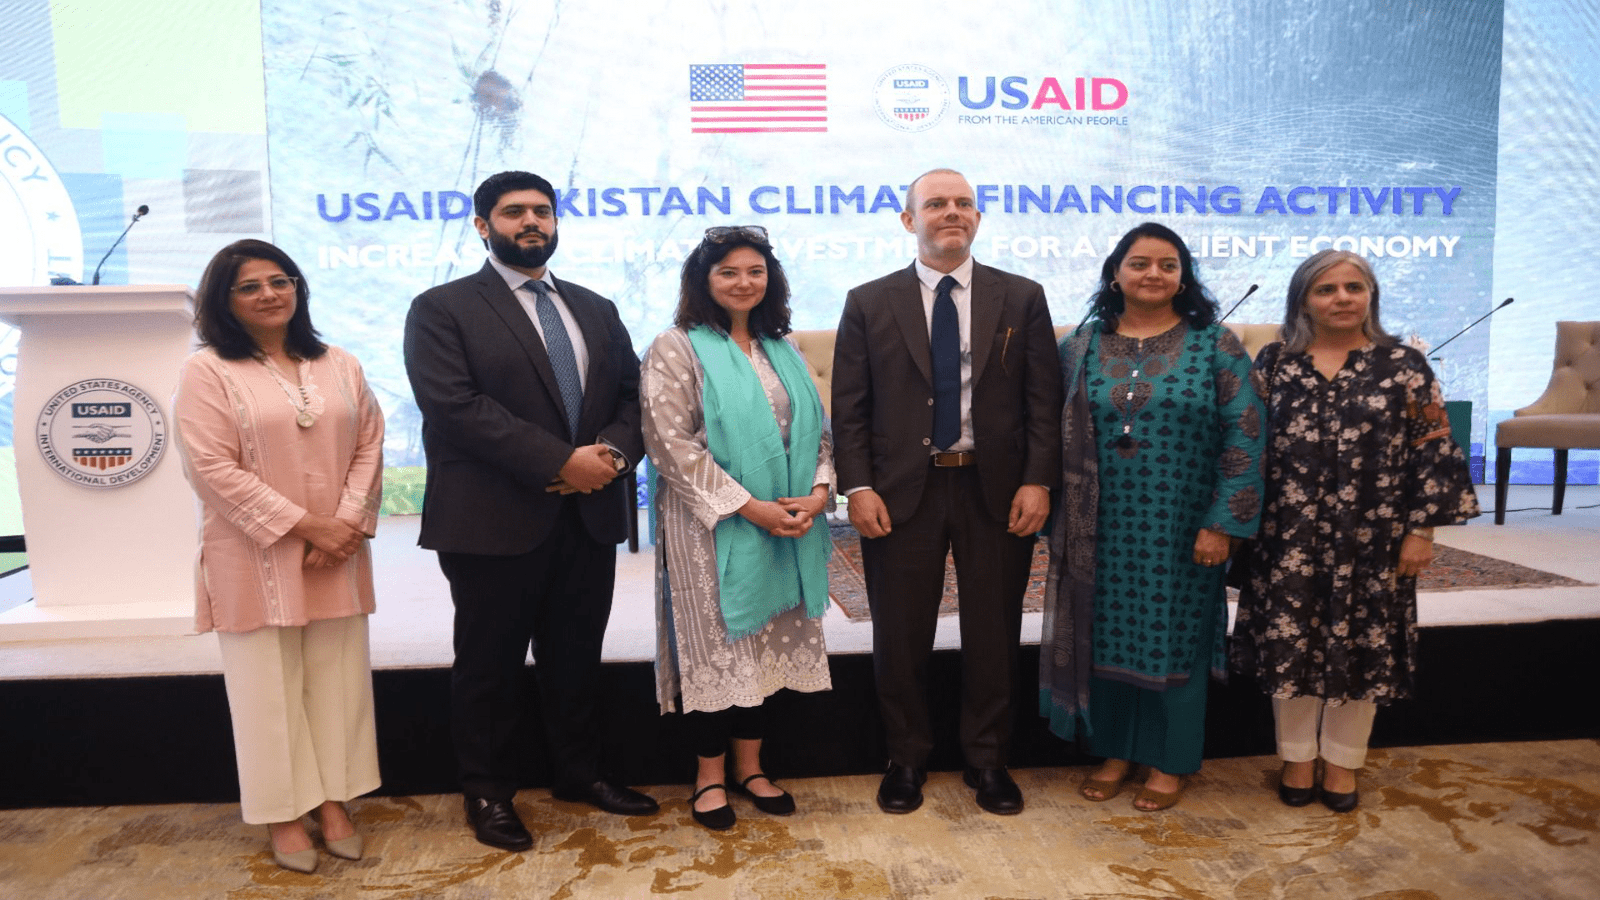 USAID Injects $10 Million into Groundbreaking Climate Initiative in Pakistan